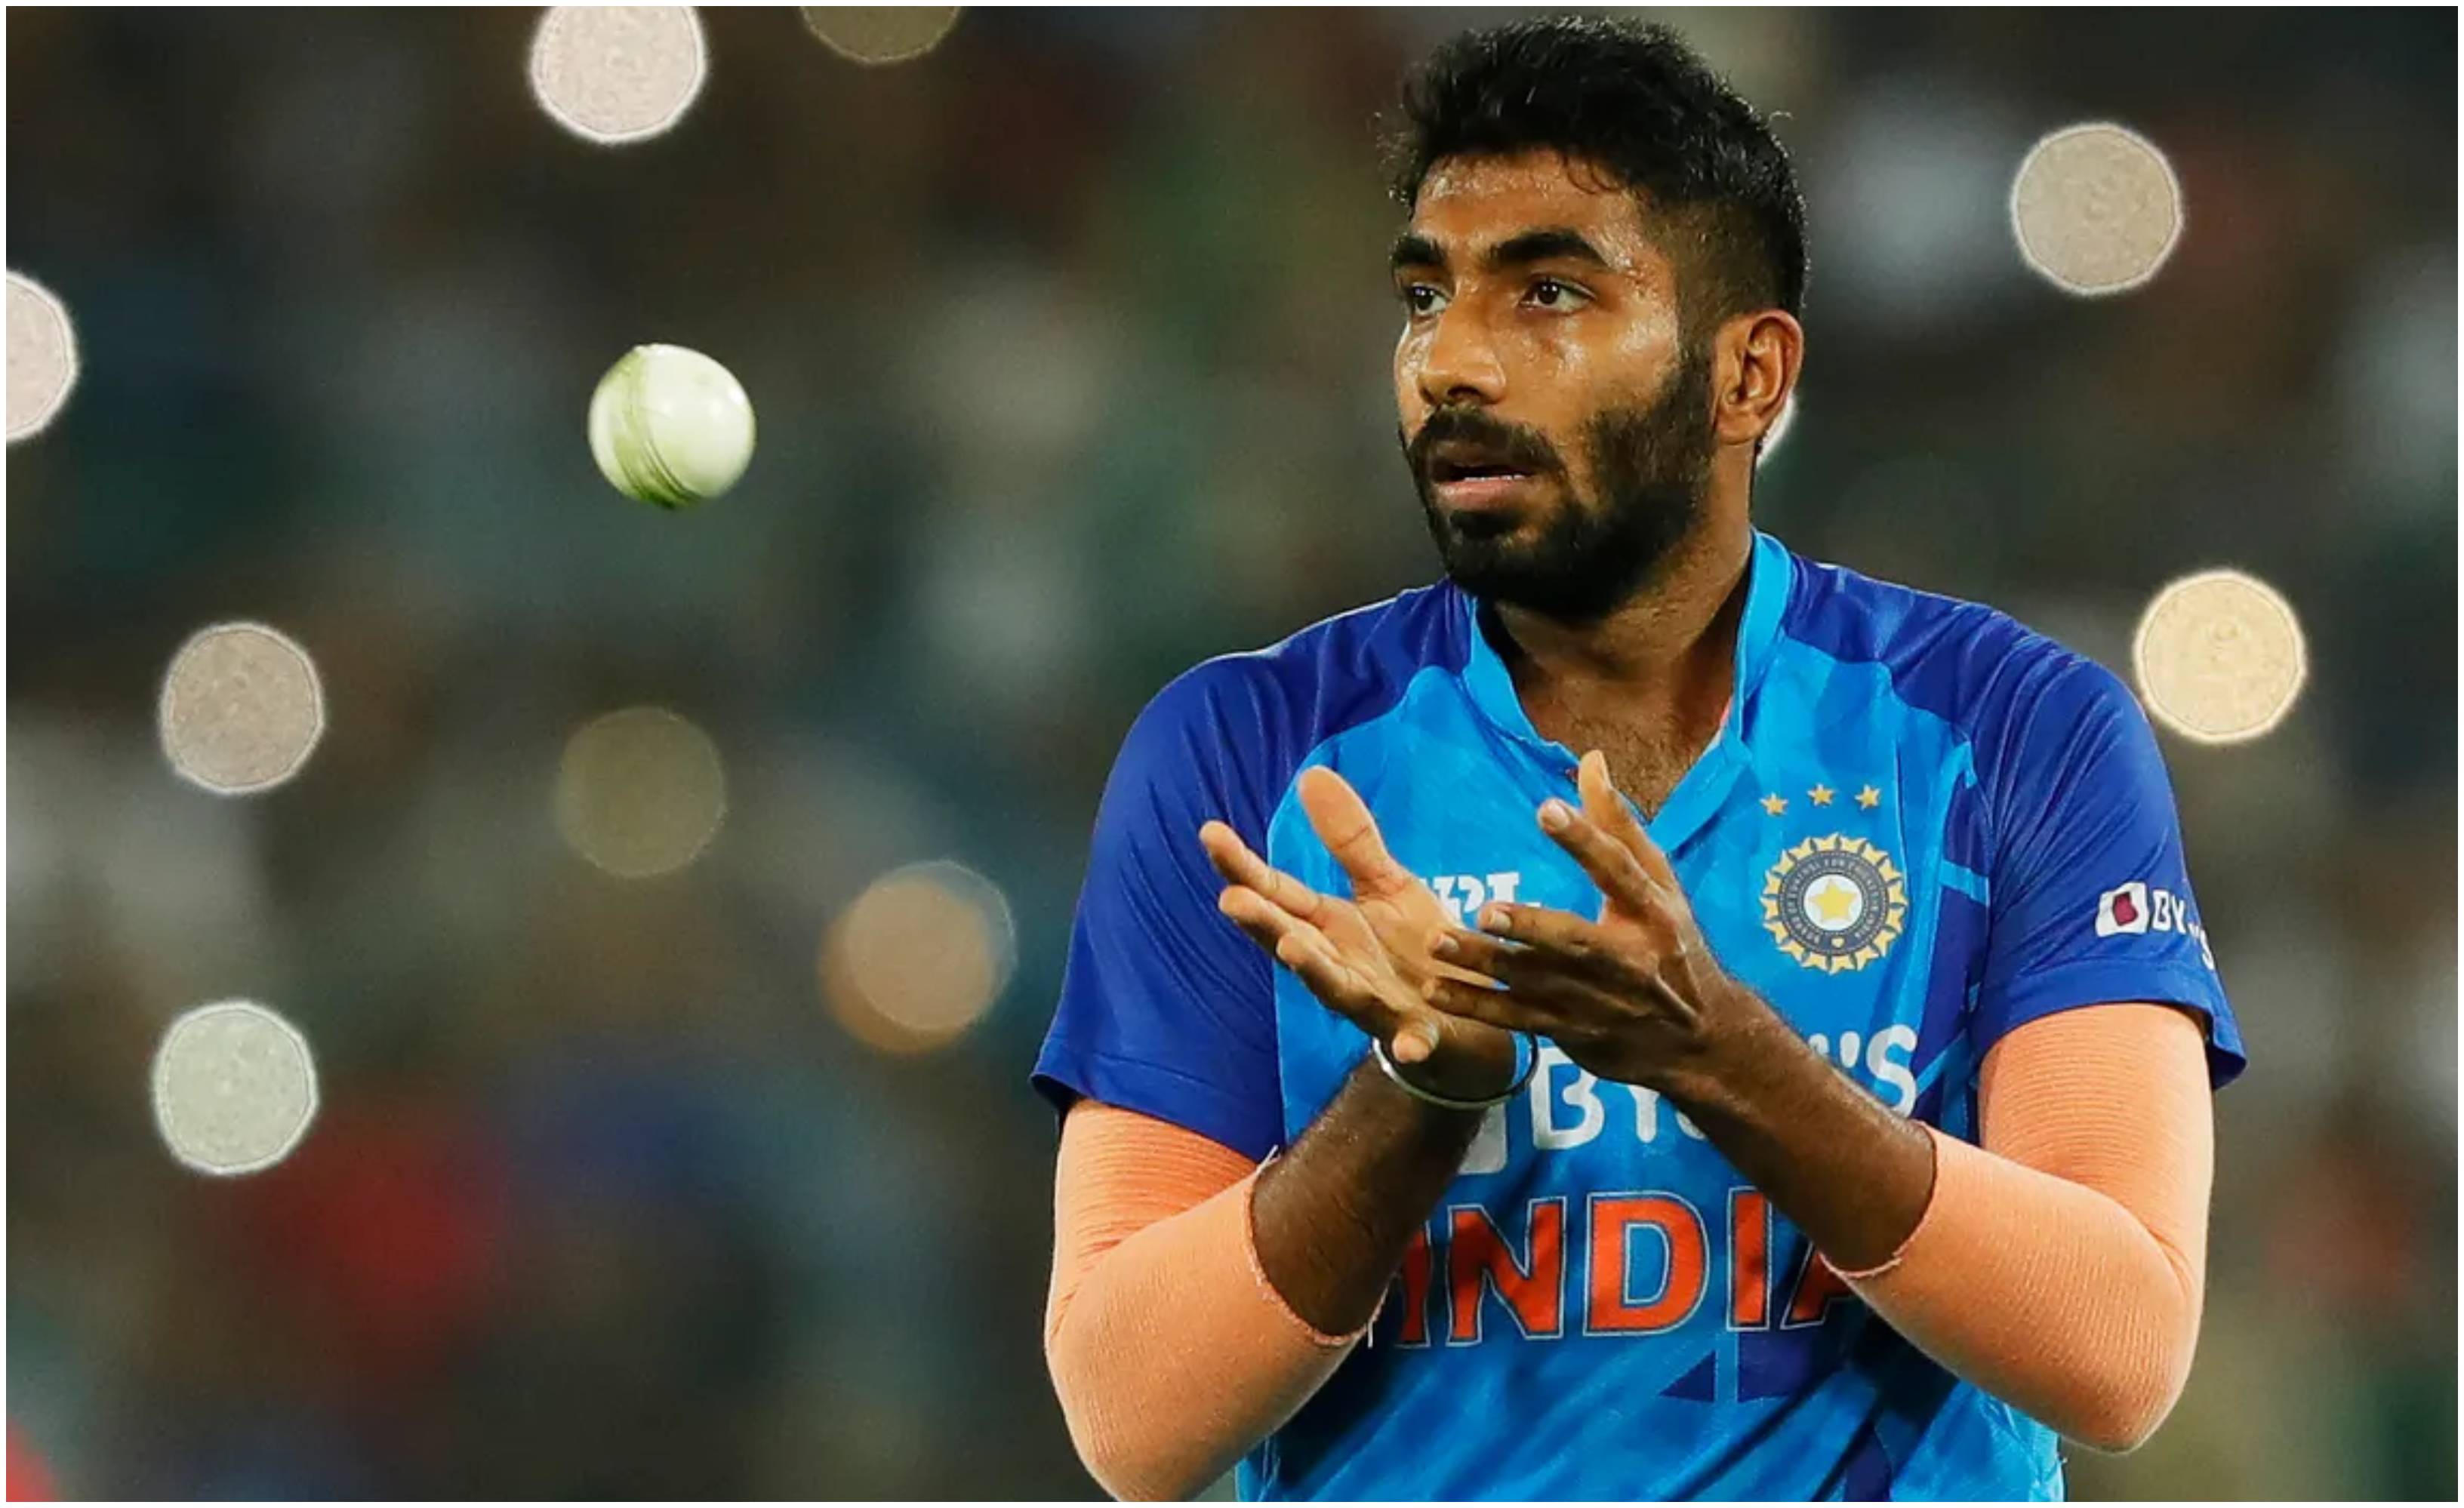 IND vs SA 1st T20: South Africa captain Temba Bavuma wary of India pacer Jasprit Bumrah threat says, ‘it is a challenge to face new ball bowlers like Bumrah’